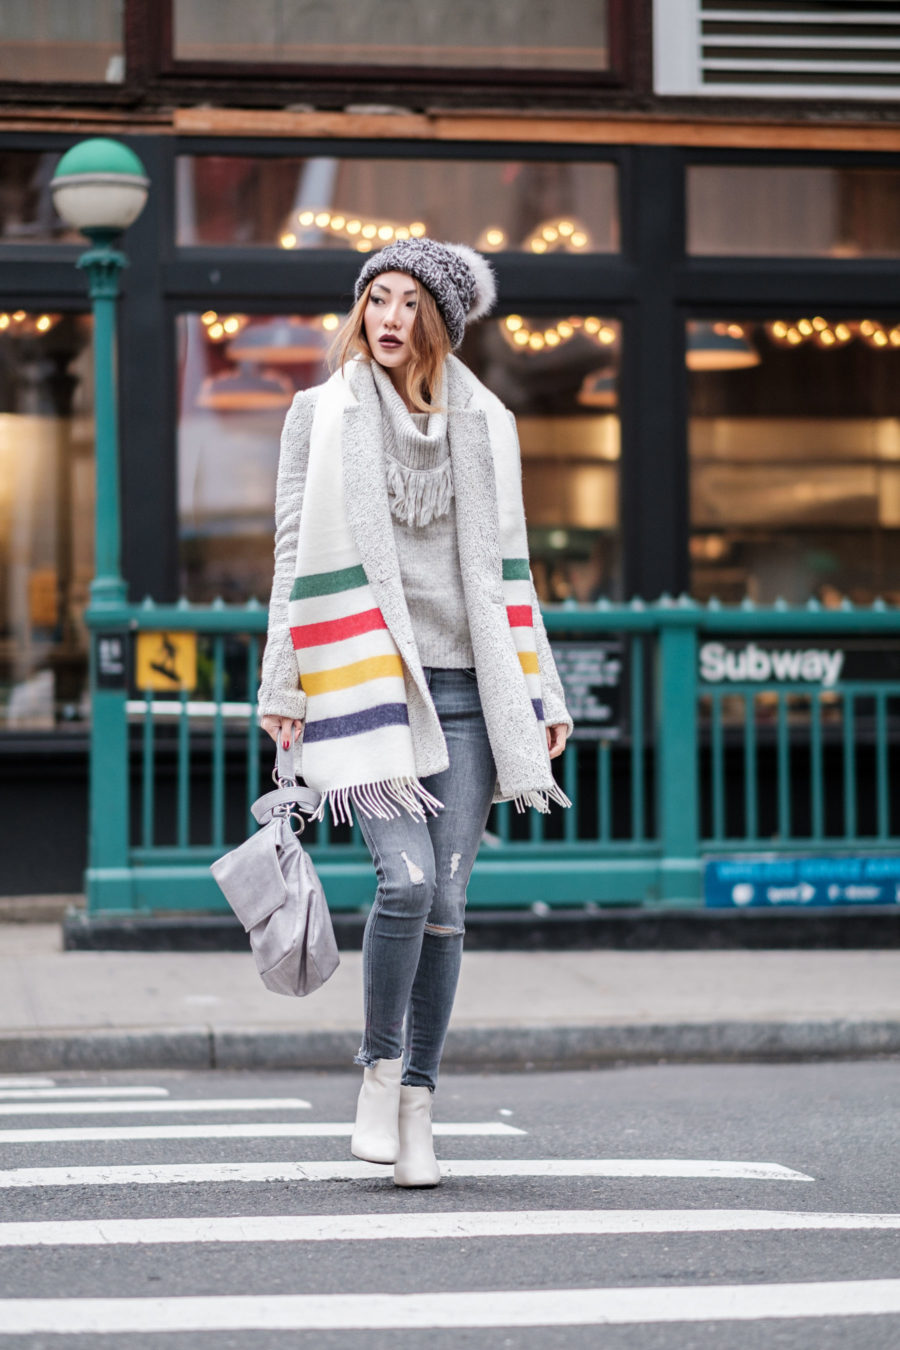 Outdated Fashion Rules You Should Break, nyc winter style, white boots, stripe scarf // Notjessfashion.com